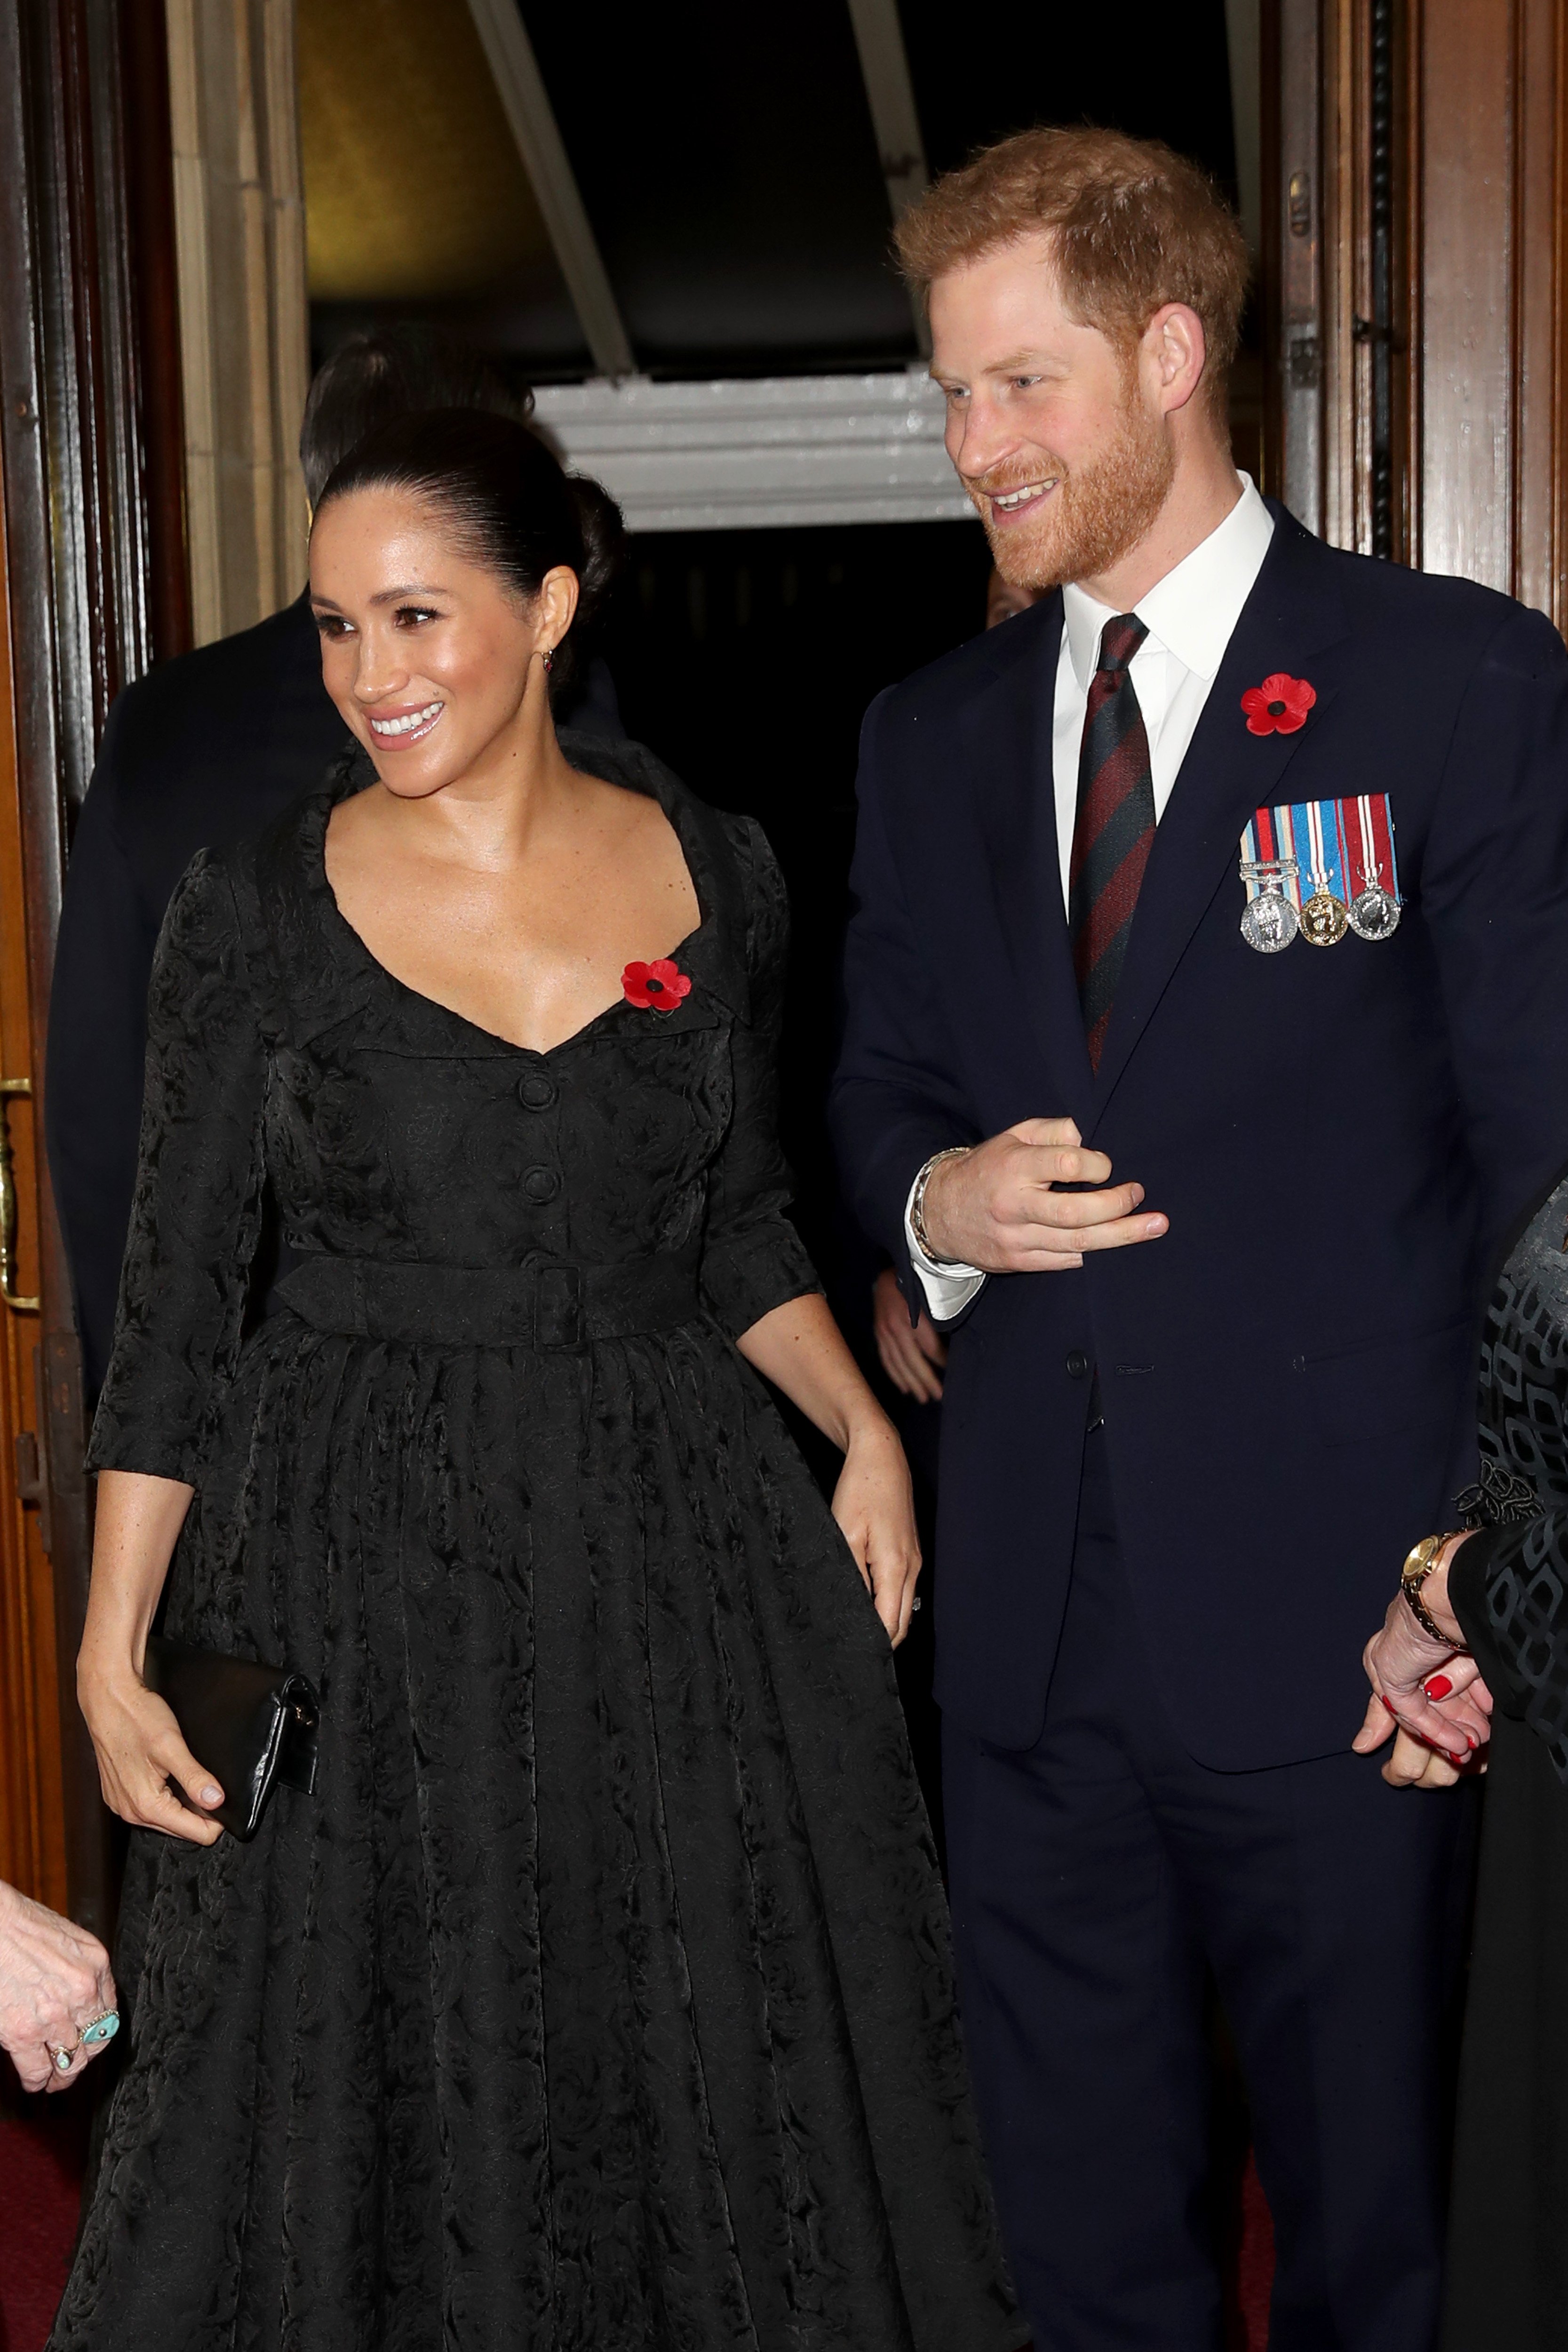 Meghan Markle and Prince Harry attend the Festival of Remembrance in London, England on November 9, 2019 | Photo: Getty Images